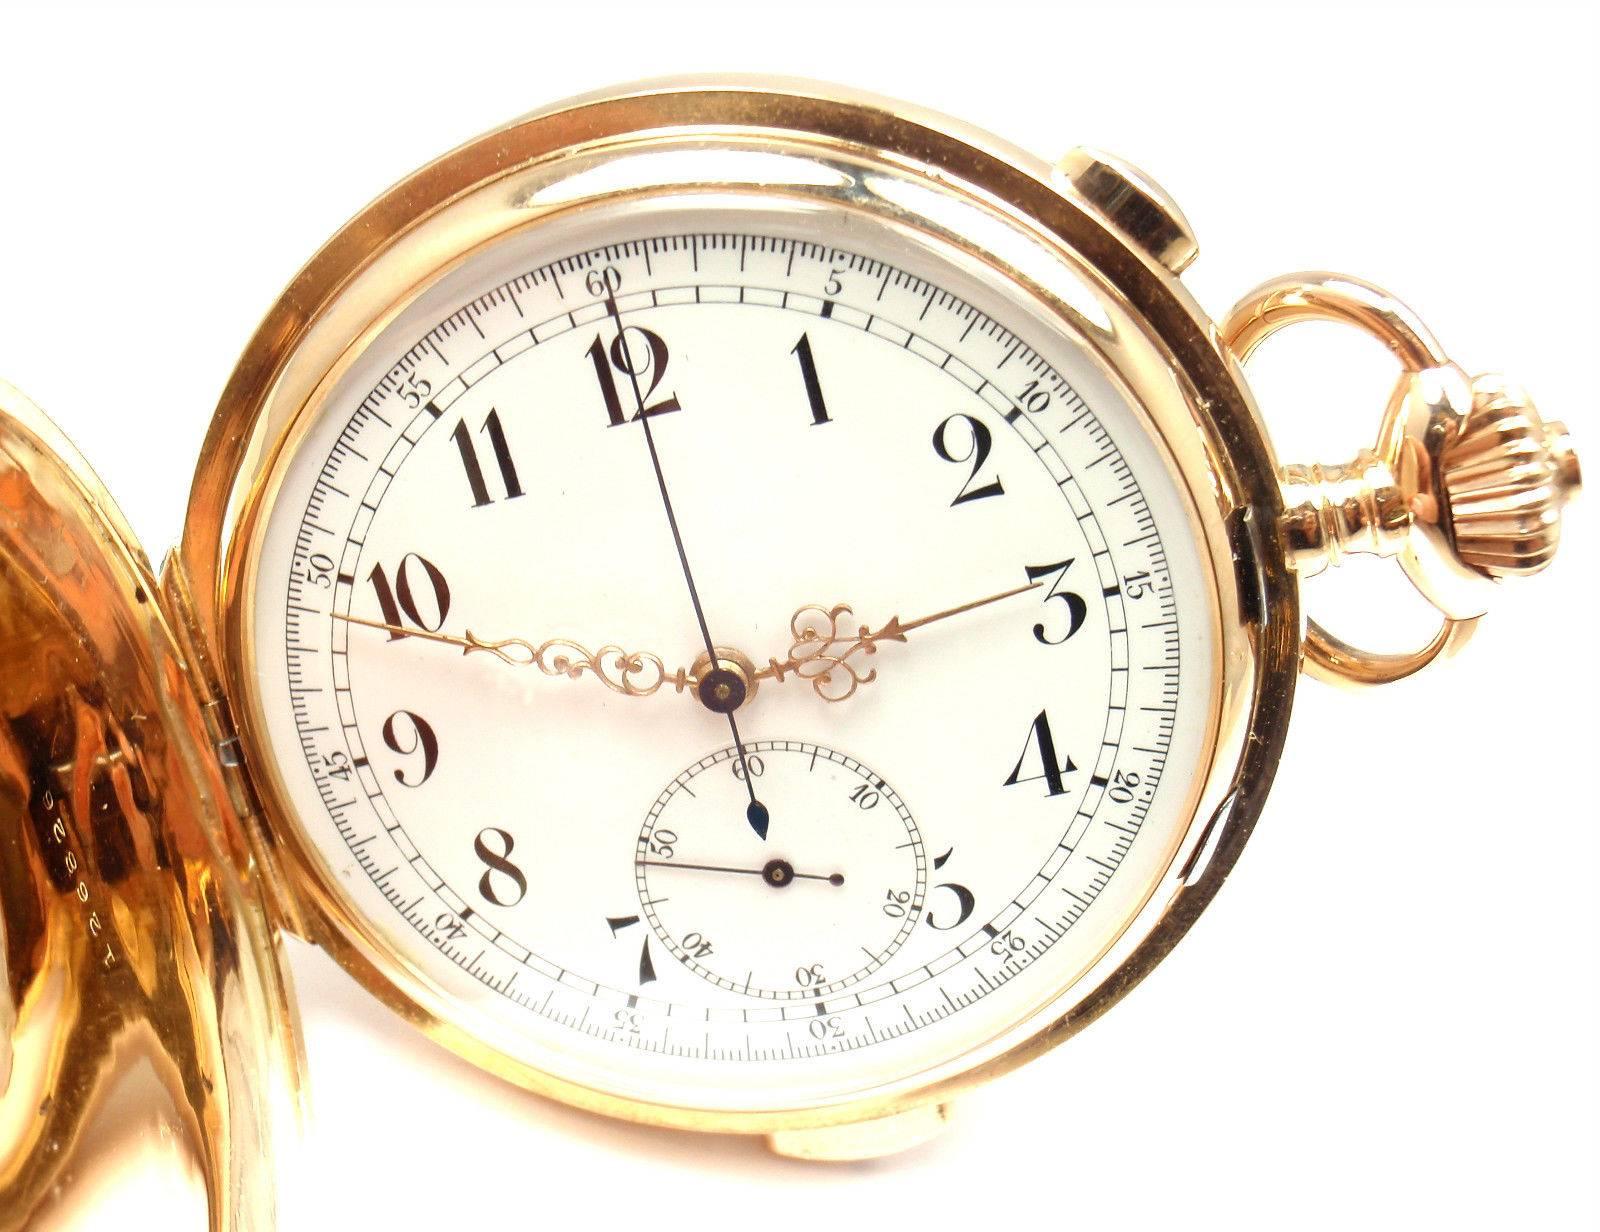 18k rose gold hunting cased quarter repeater large vintage pocket watch. 
This watch is great condition and works great, fully functional. 
Case Size: 57mm
Weight: 109.1 grams
Movement: Quarter repeater
Stamped: 18k 126826 Repetition